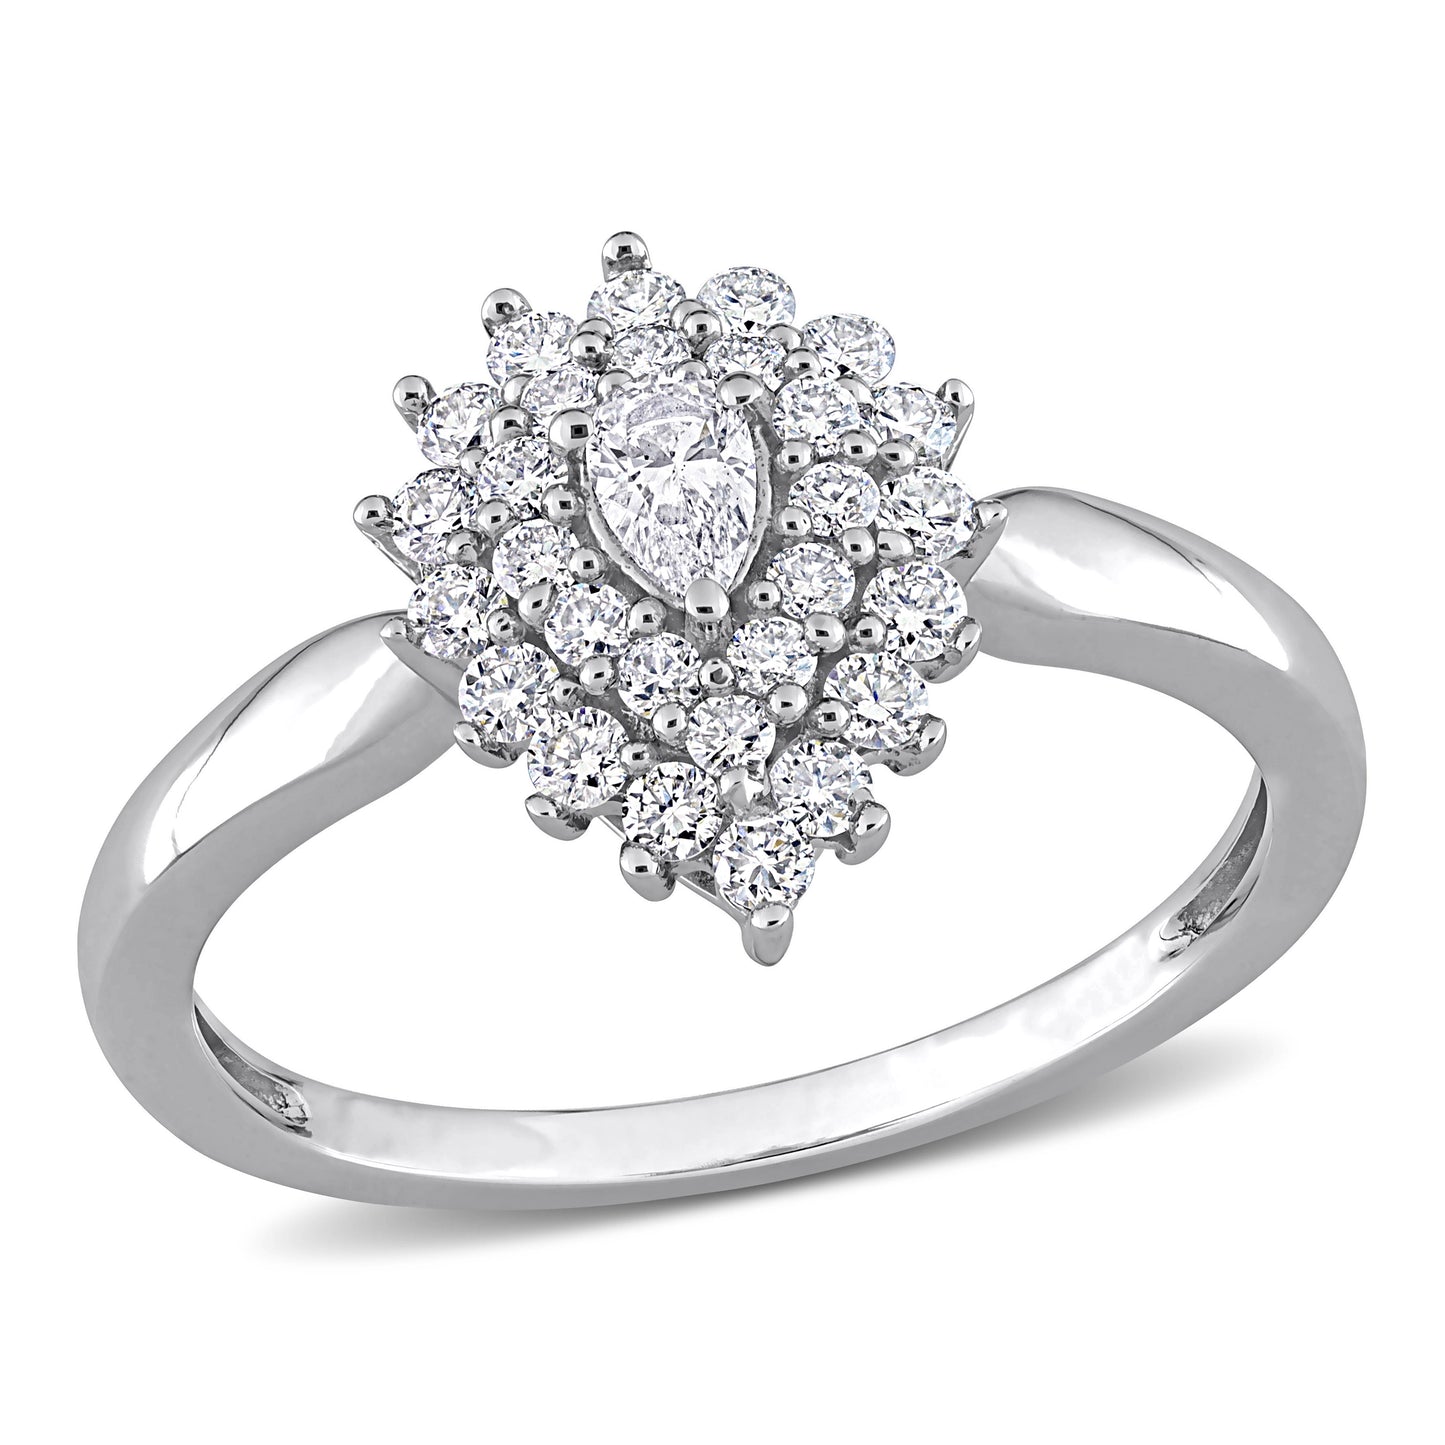 Double Halo Pear Cut Diamond Ring in 14k White Gold